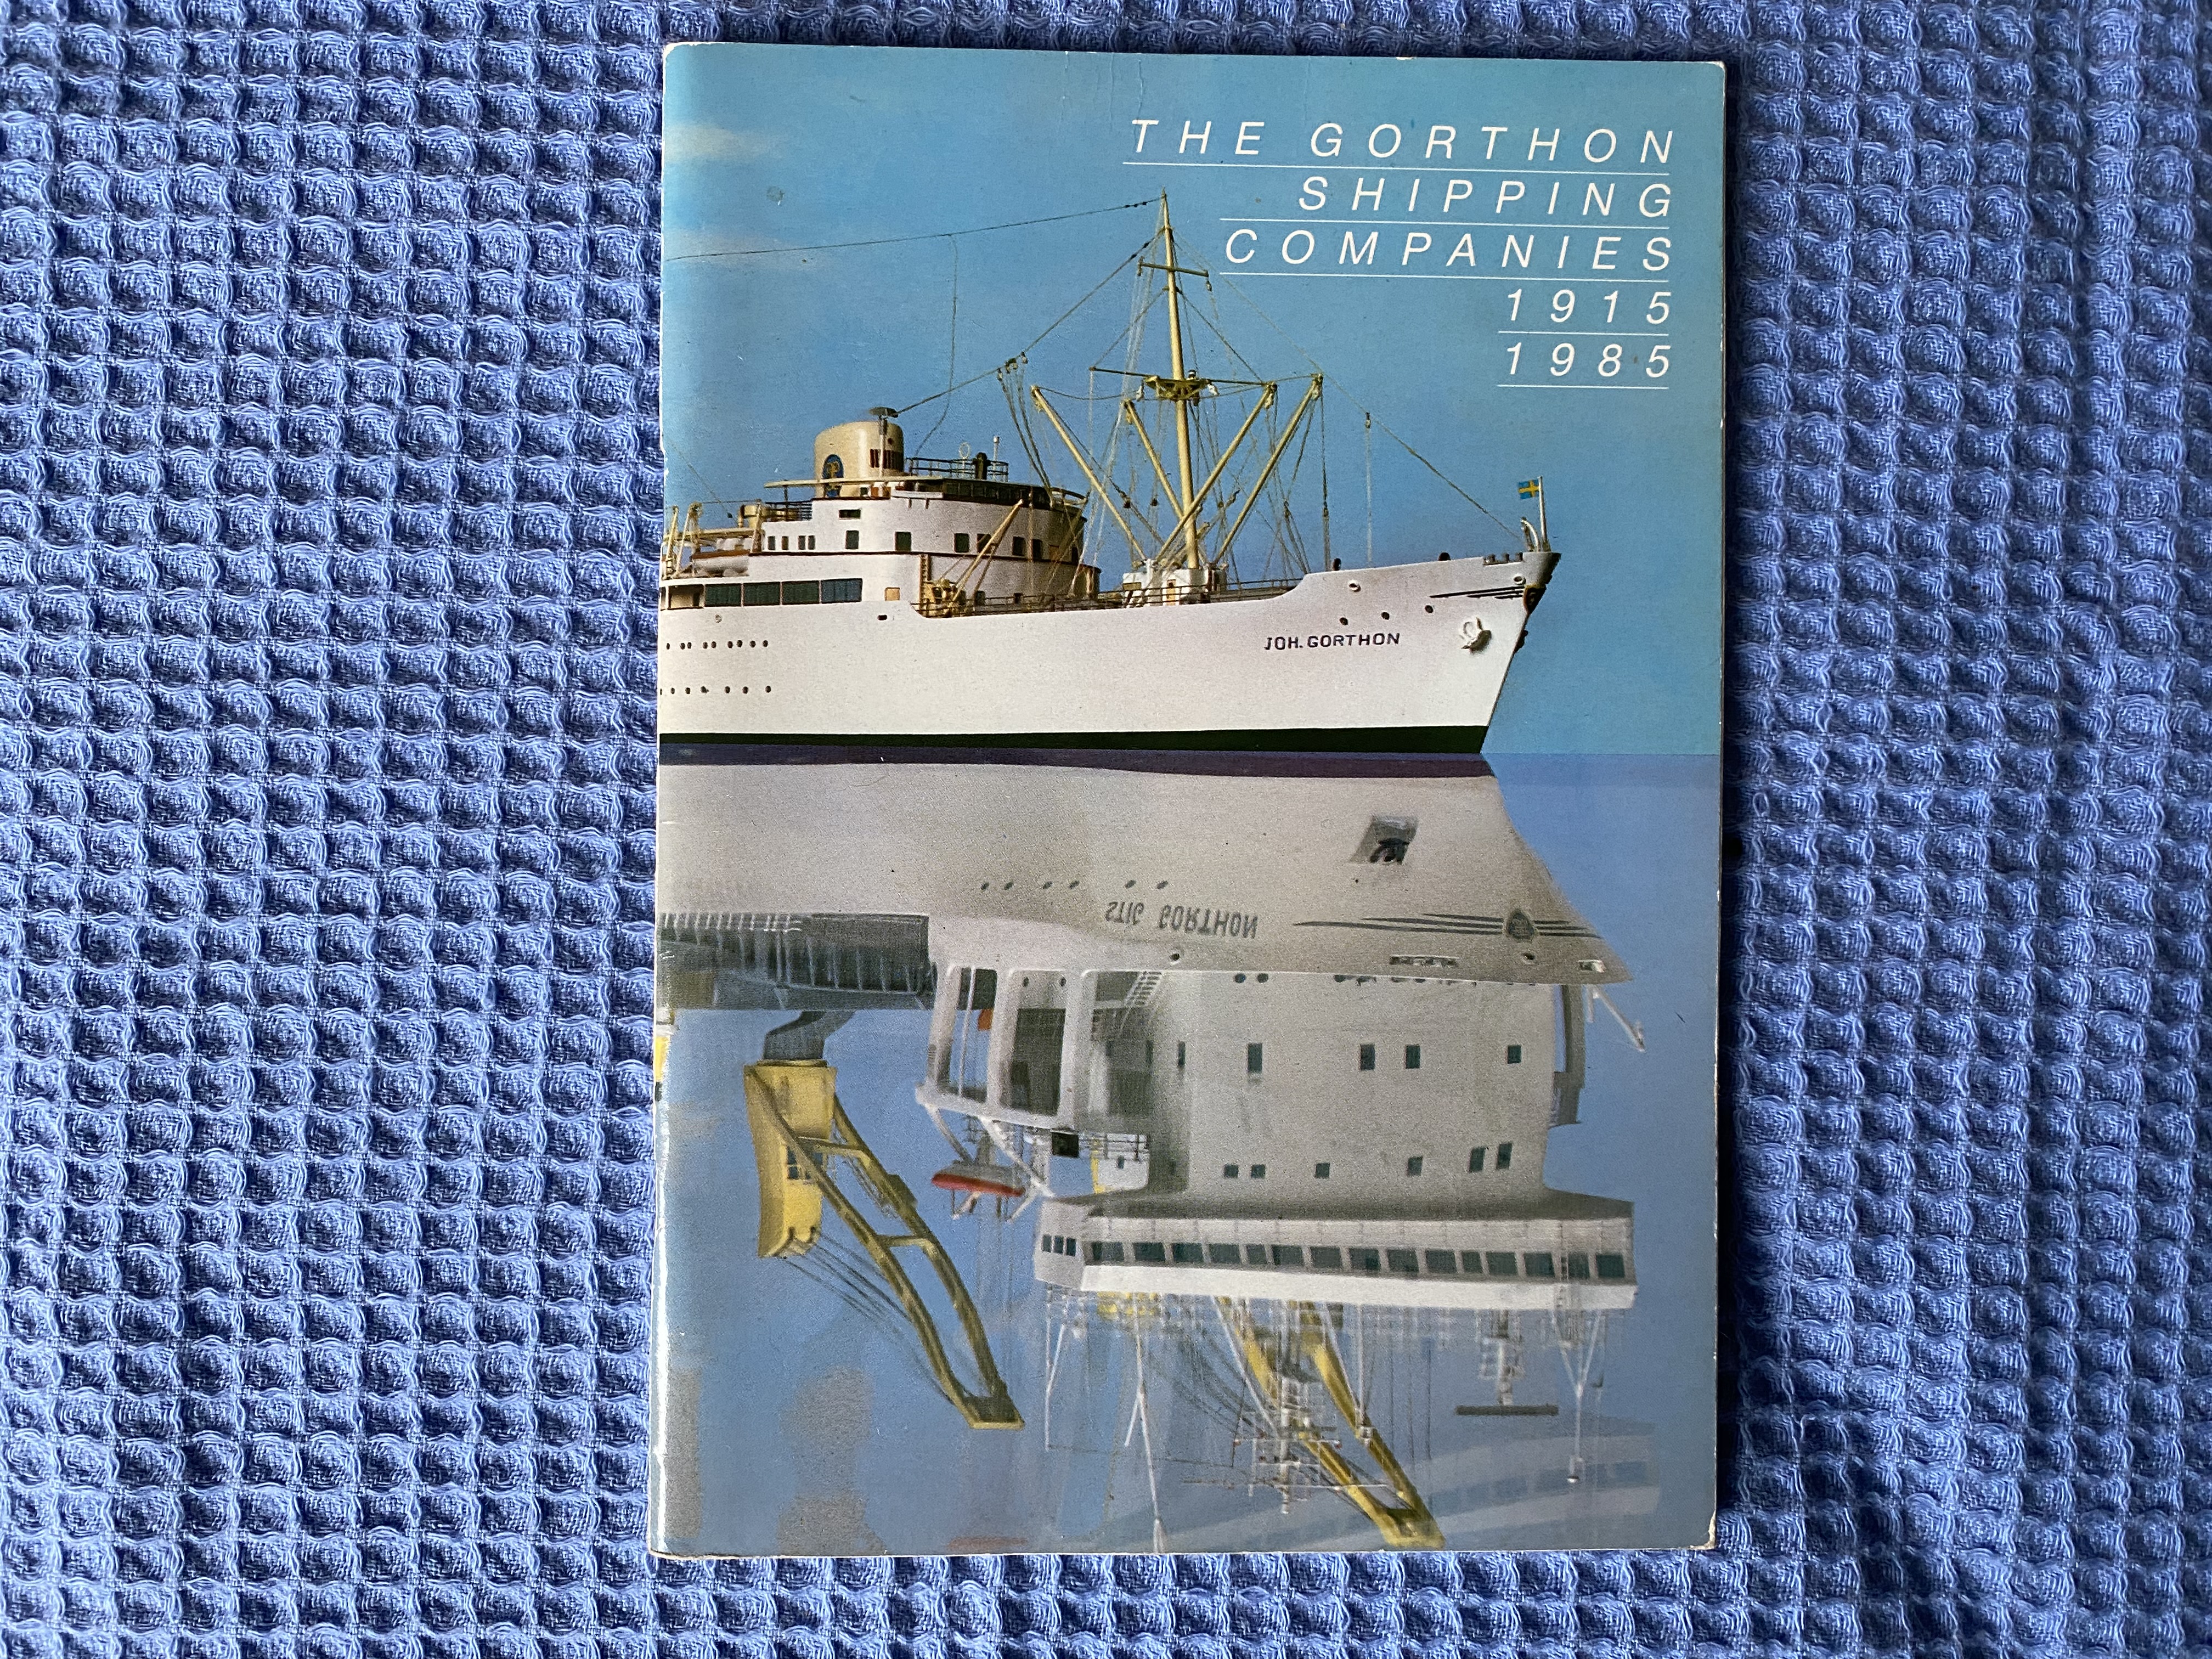 BOOKLET FROM THE GORTHON SHIPPING COMPANIES 1915 - 1985